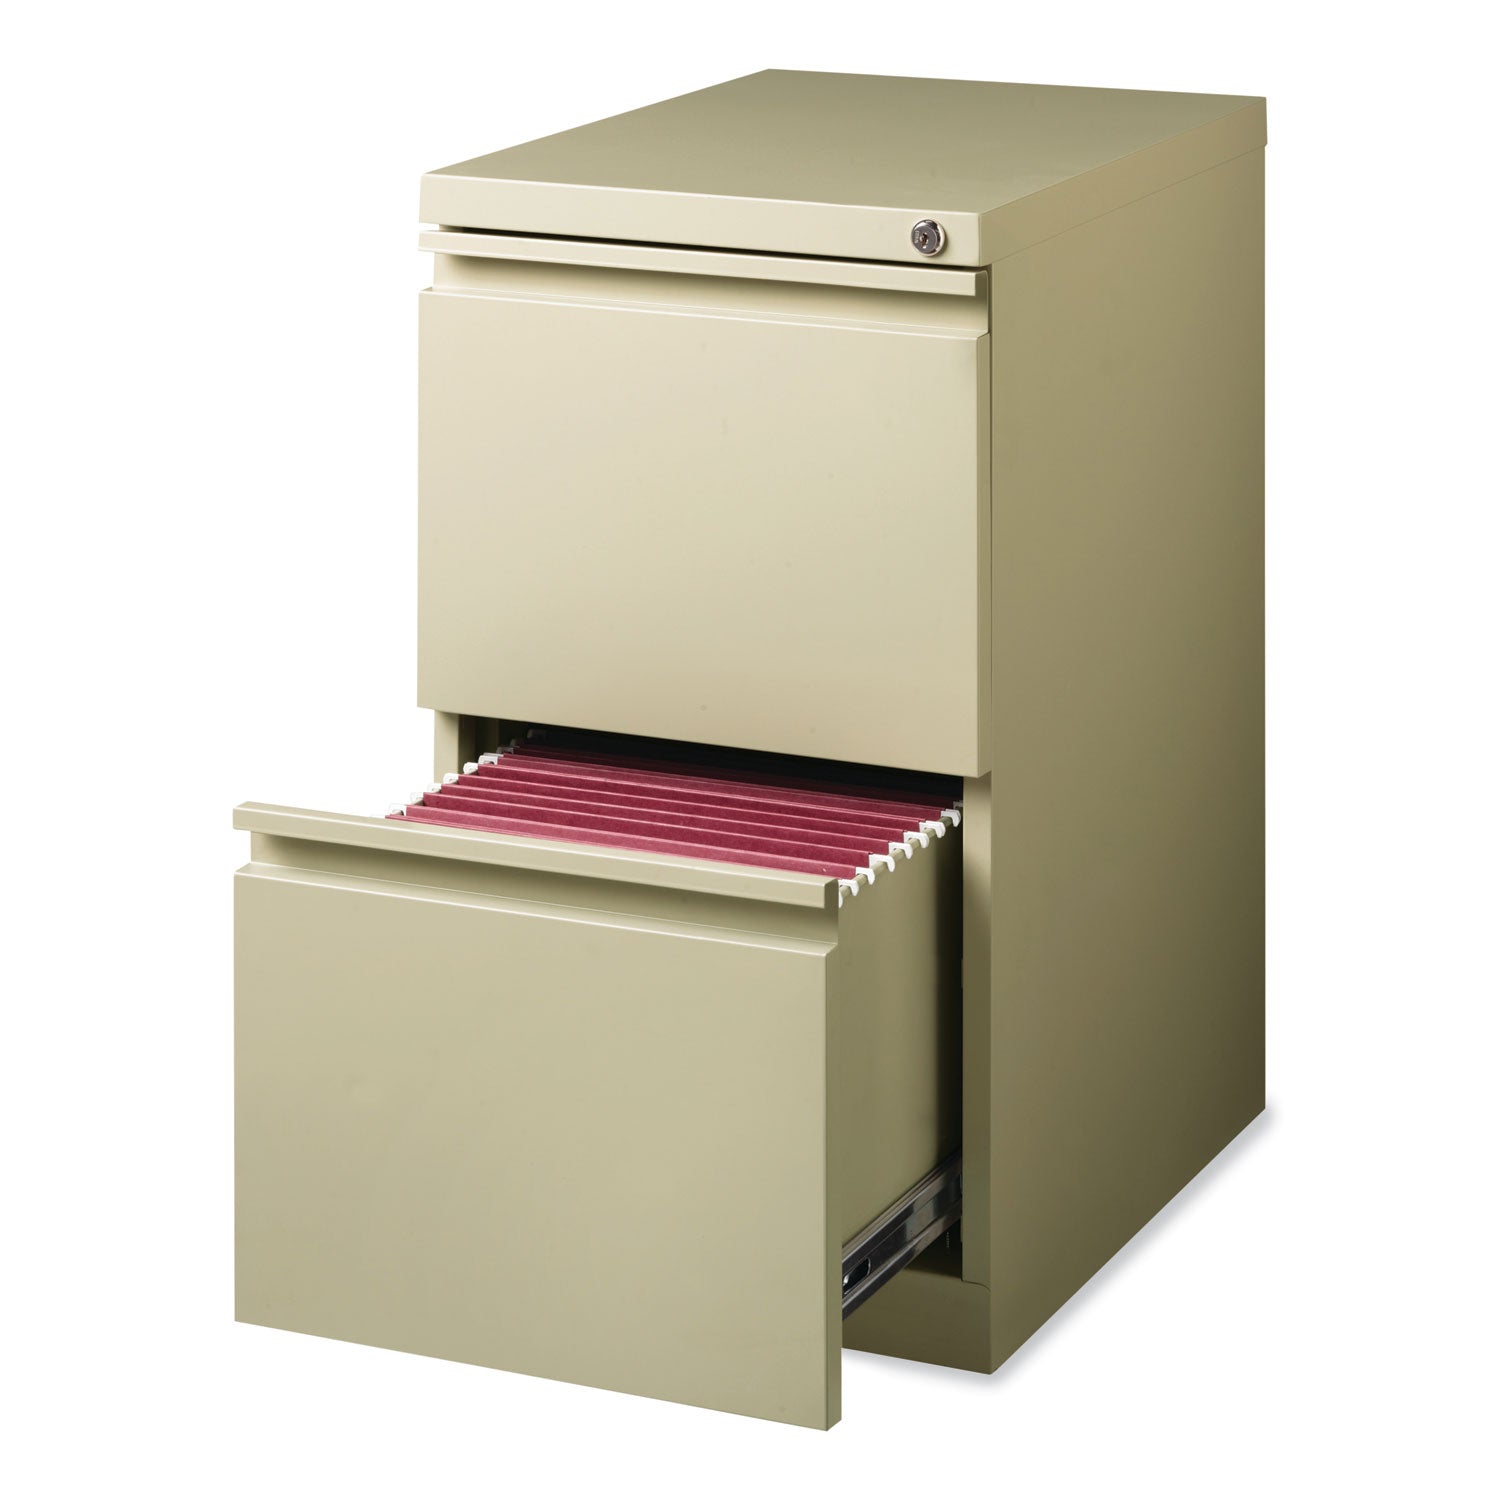 full-width-pull-20-deep-mobile-pedestal-file-2-drawer-file-file-letter-putty-15x1988x2775-ships-in-4-6-business-days_hid18577 - 3